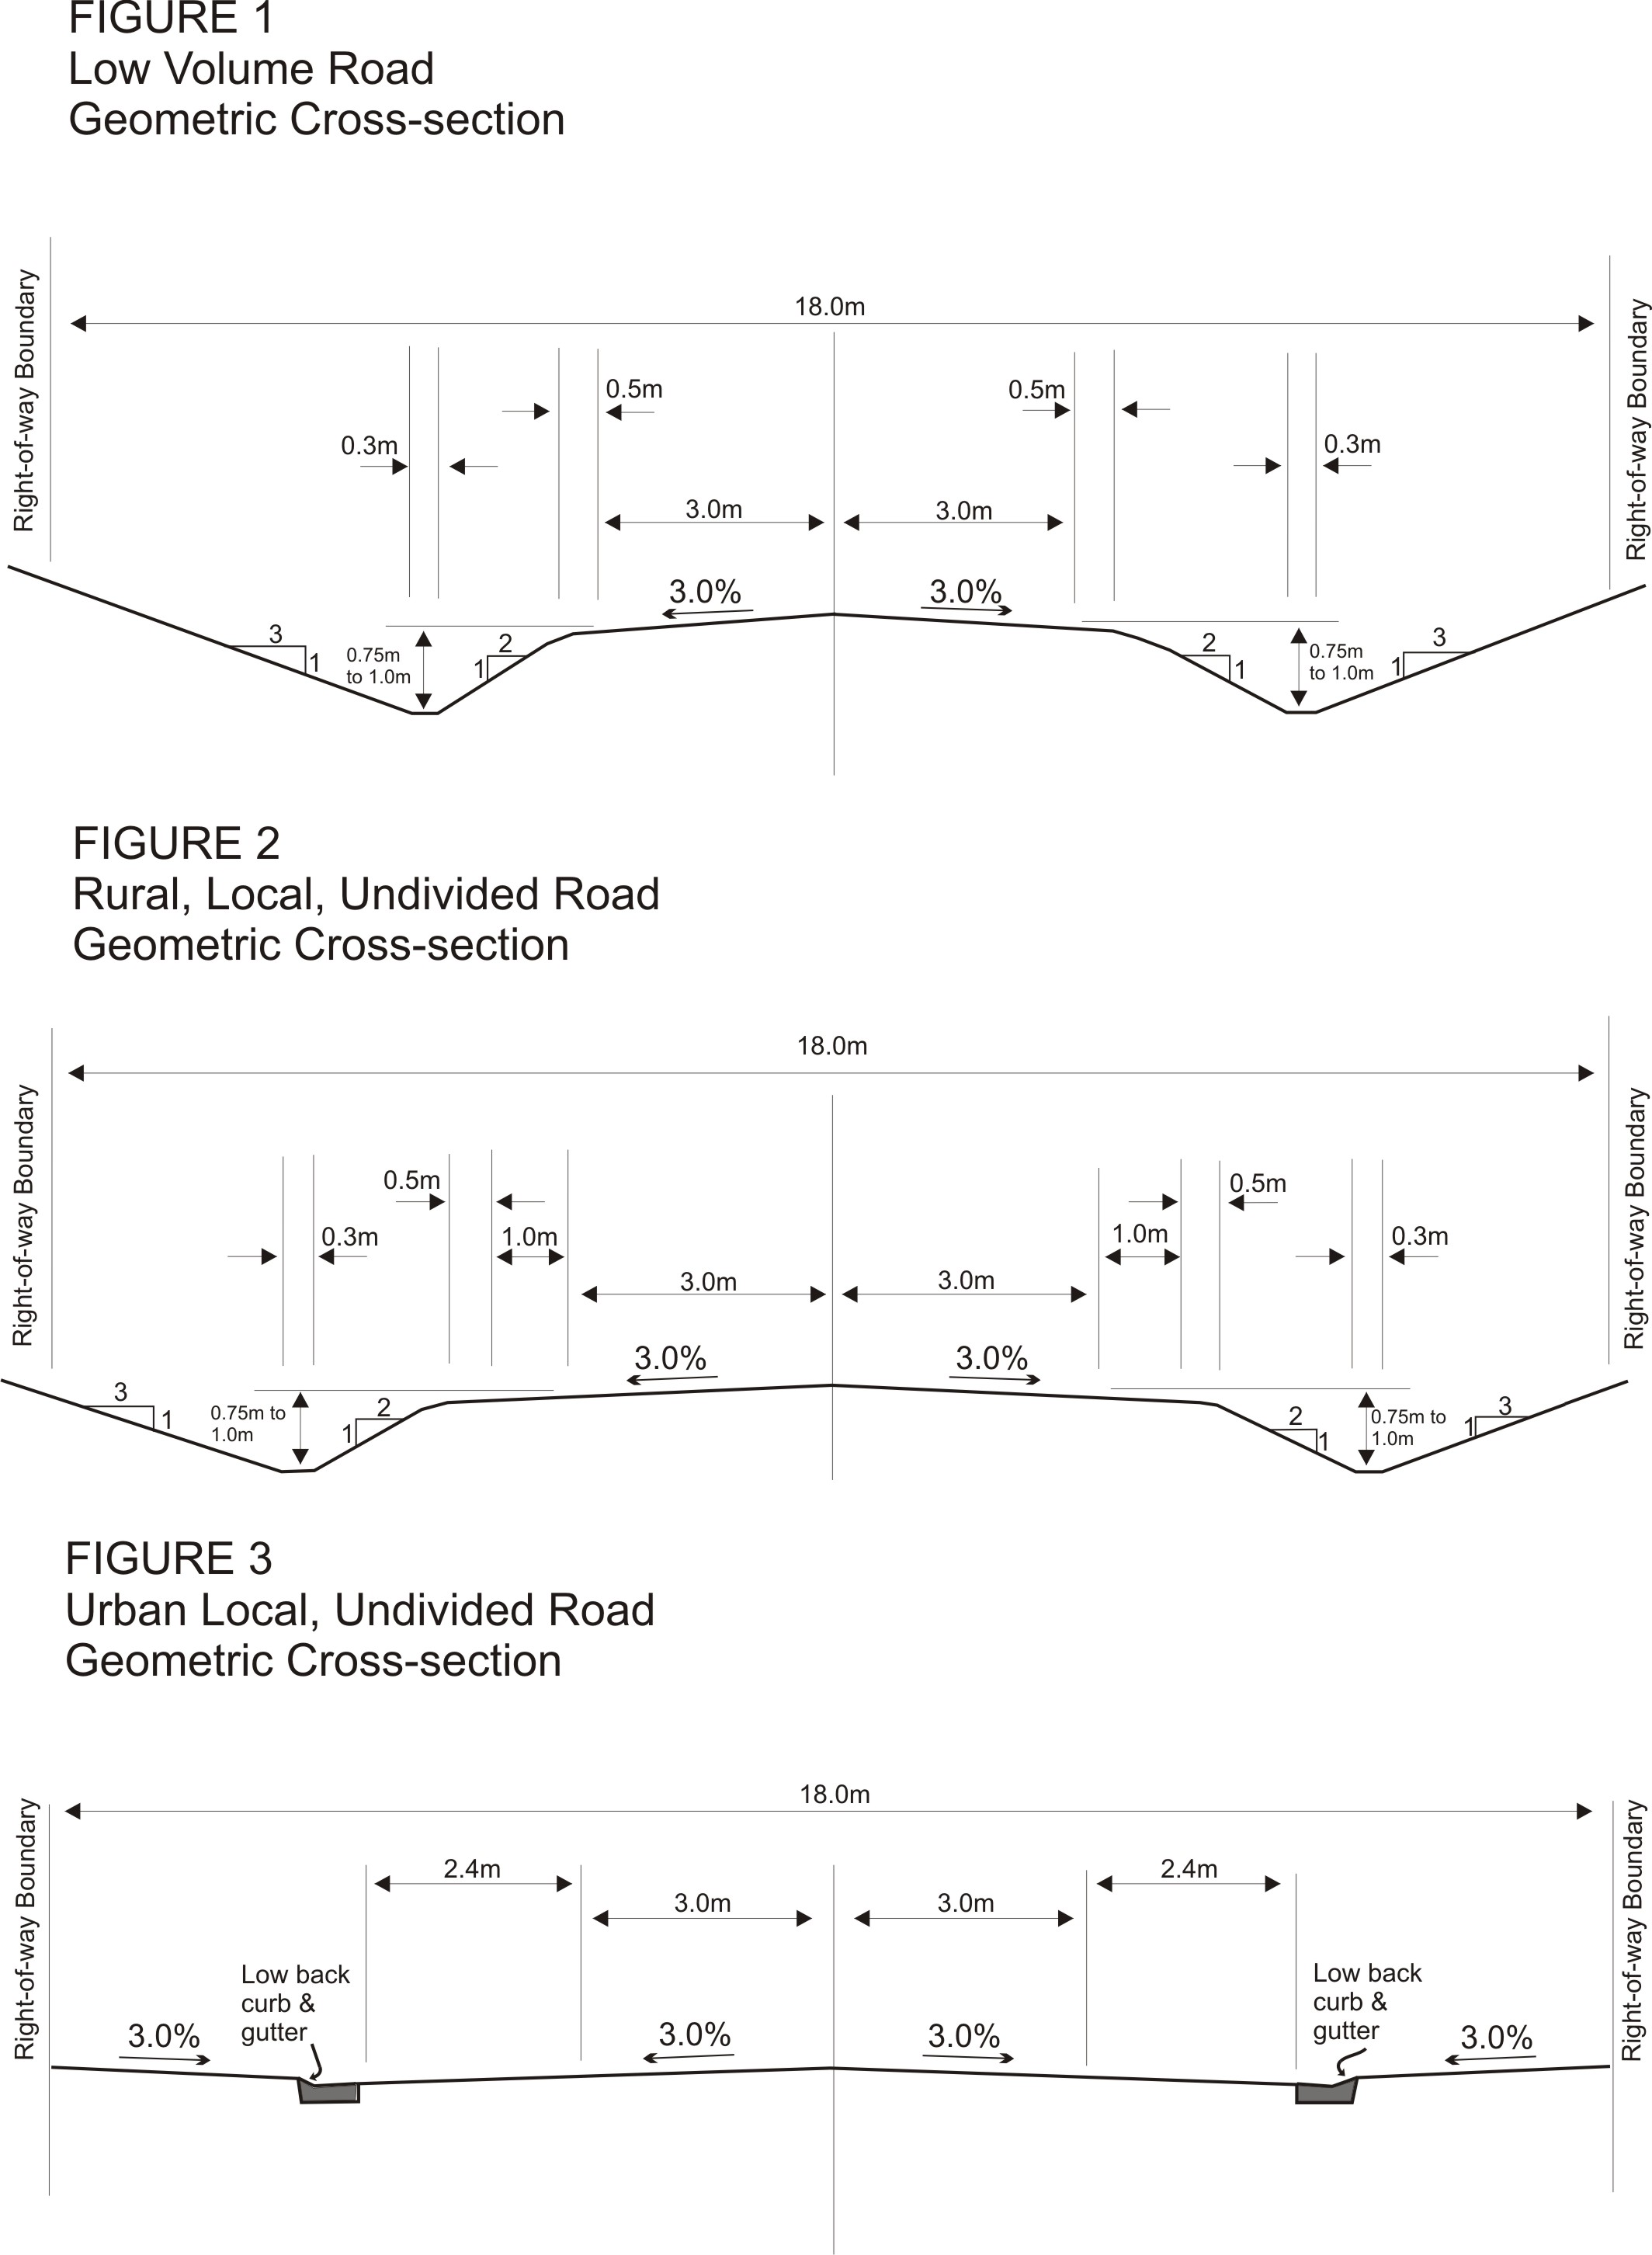 road standards_cross-sections fig 1-3